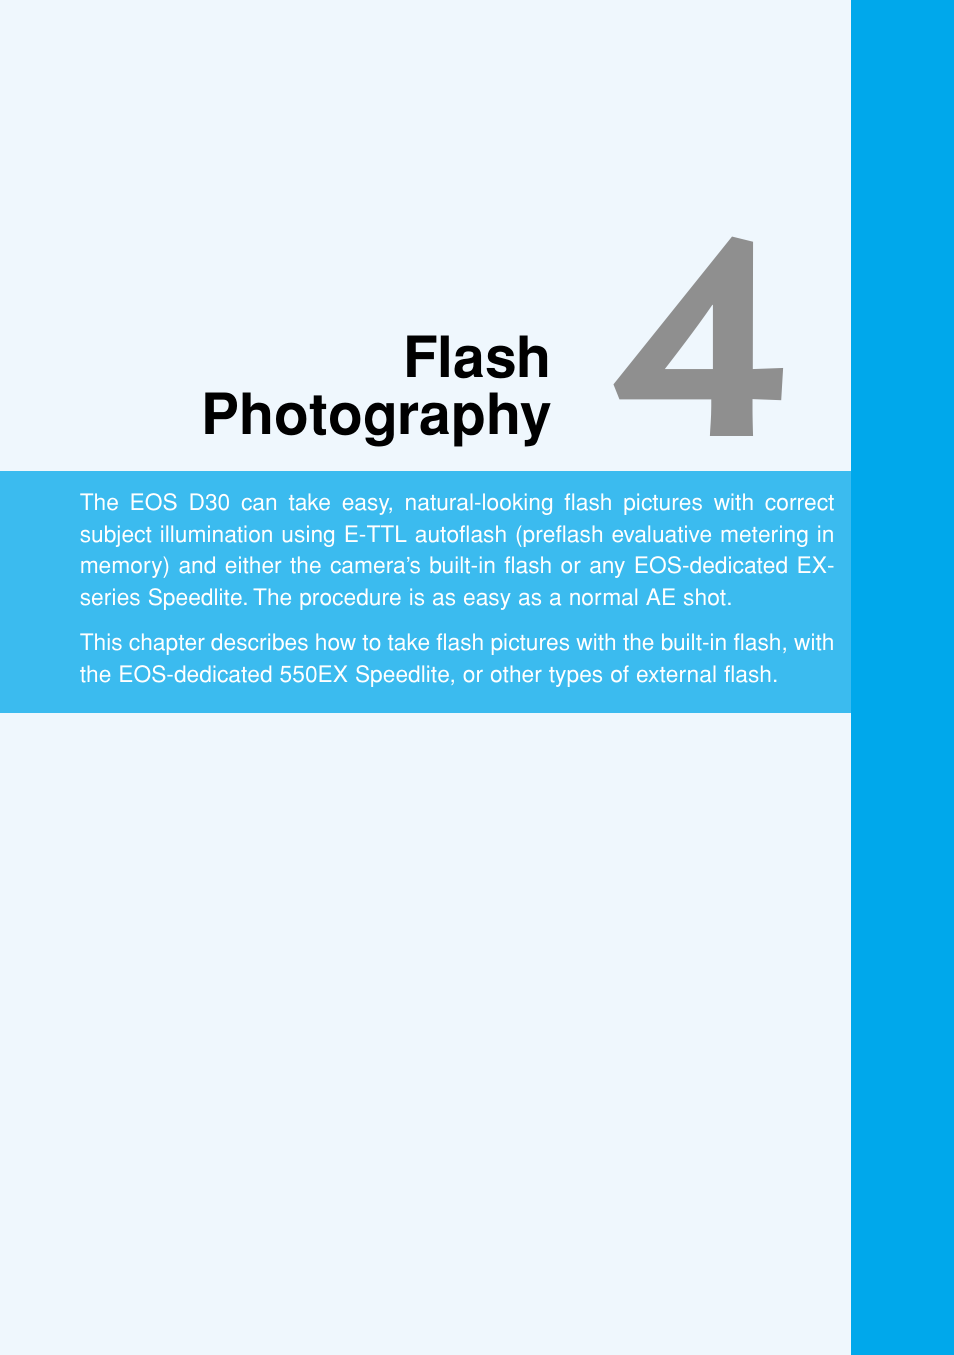 Flash photography | Canon EOS D30 User Manual | Page 89 / 152